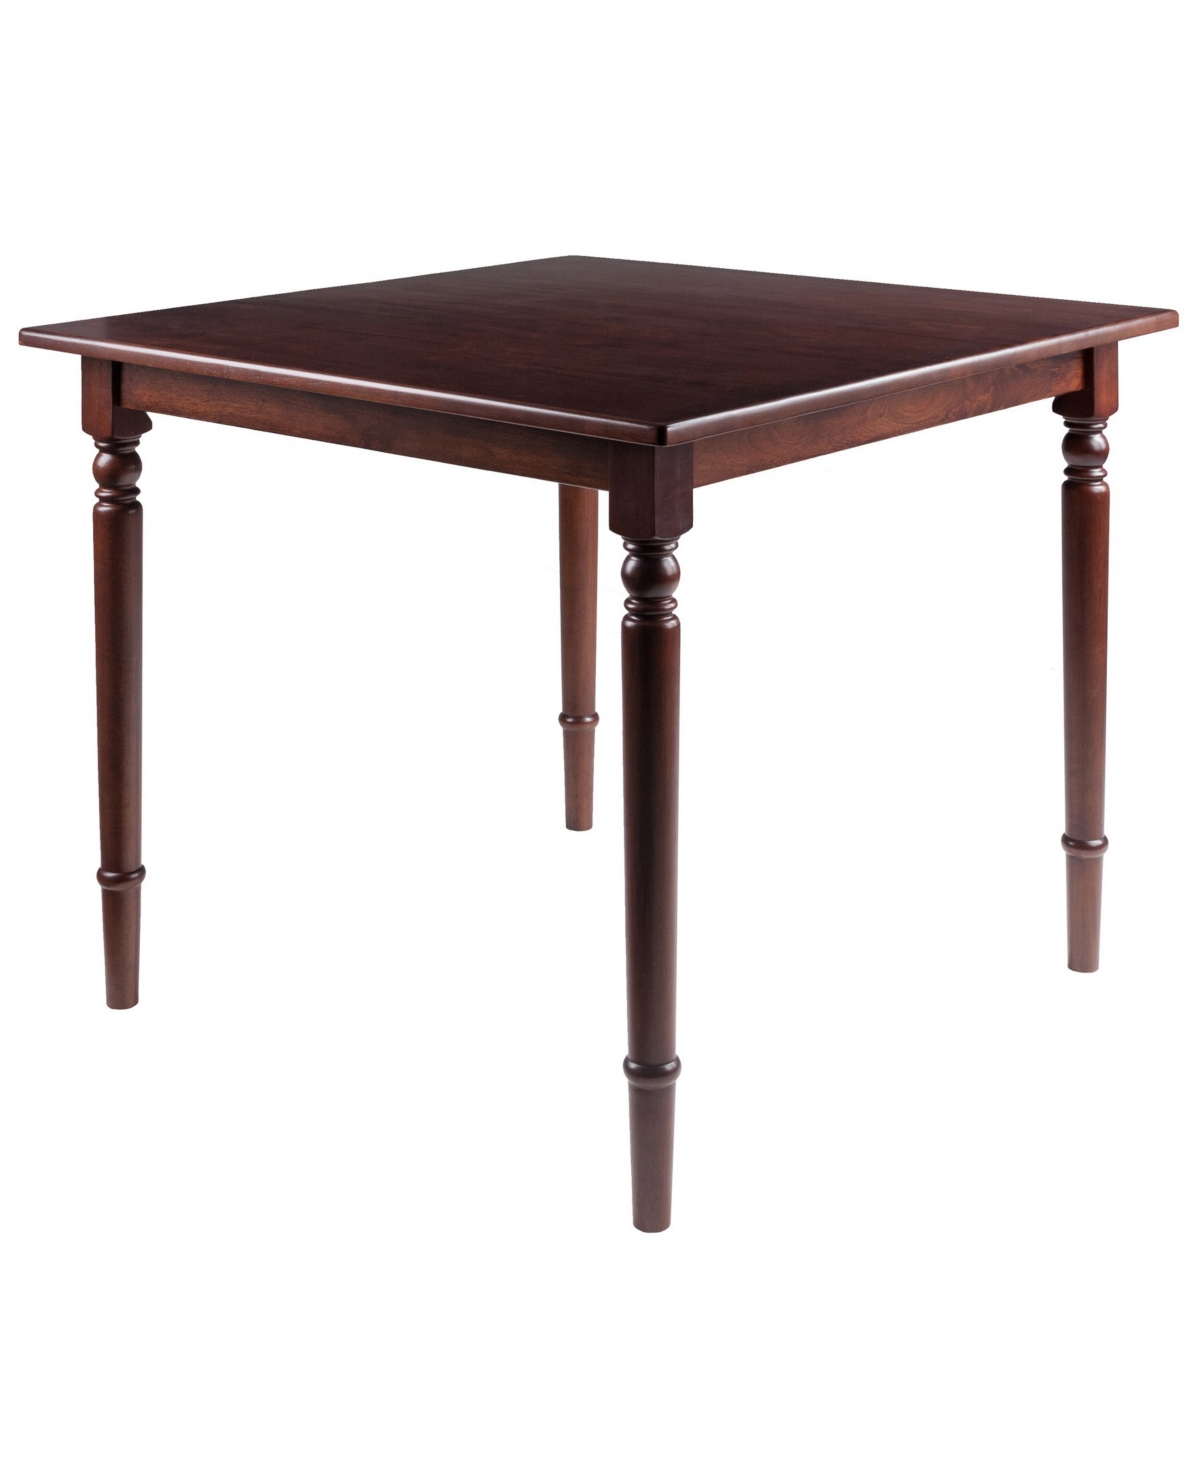 Winsome Mornay 30.08" Wood Square Dining Table In Walnut